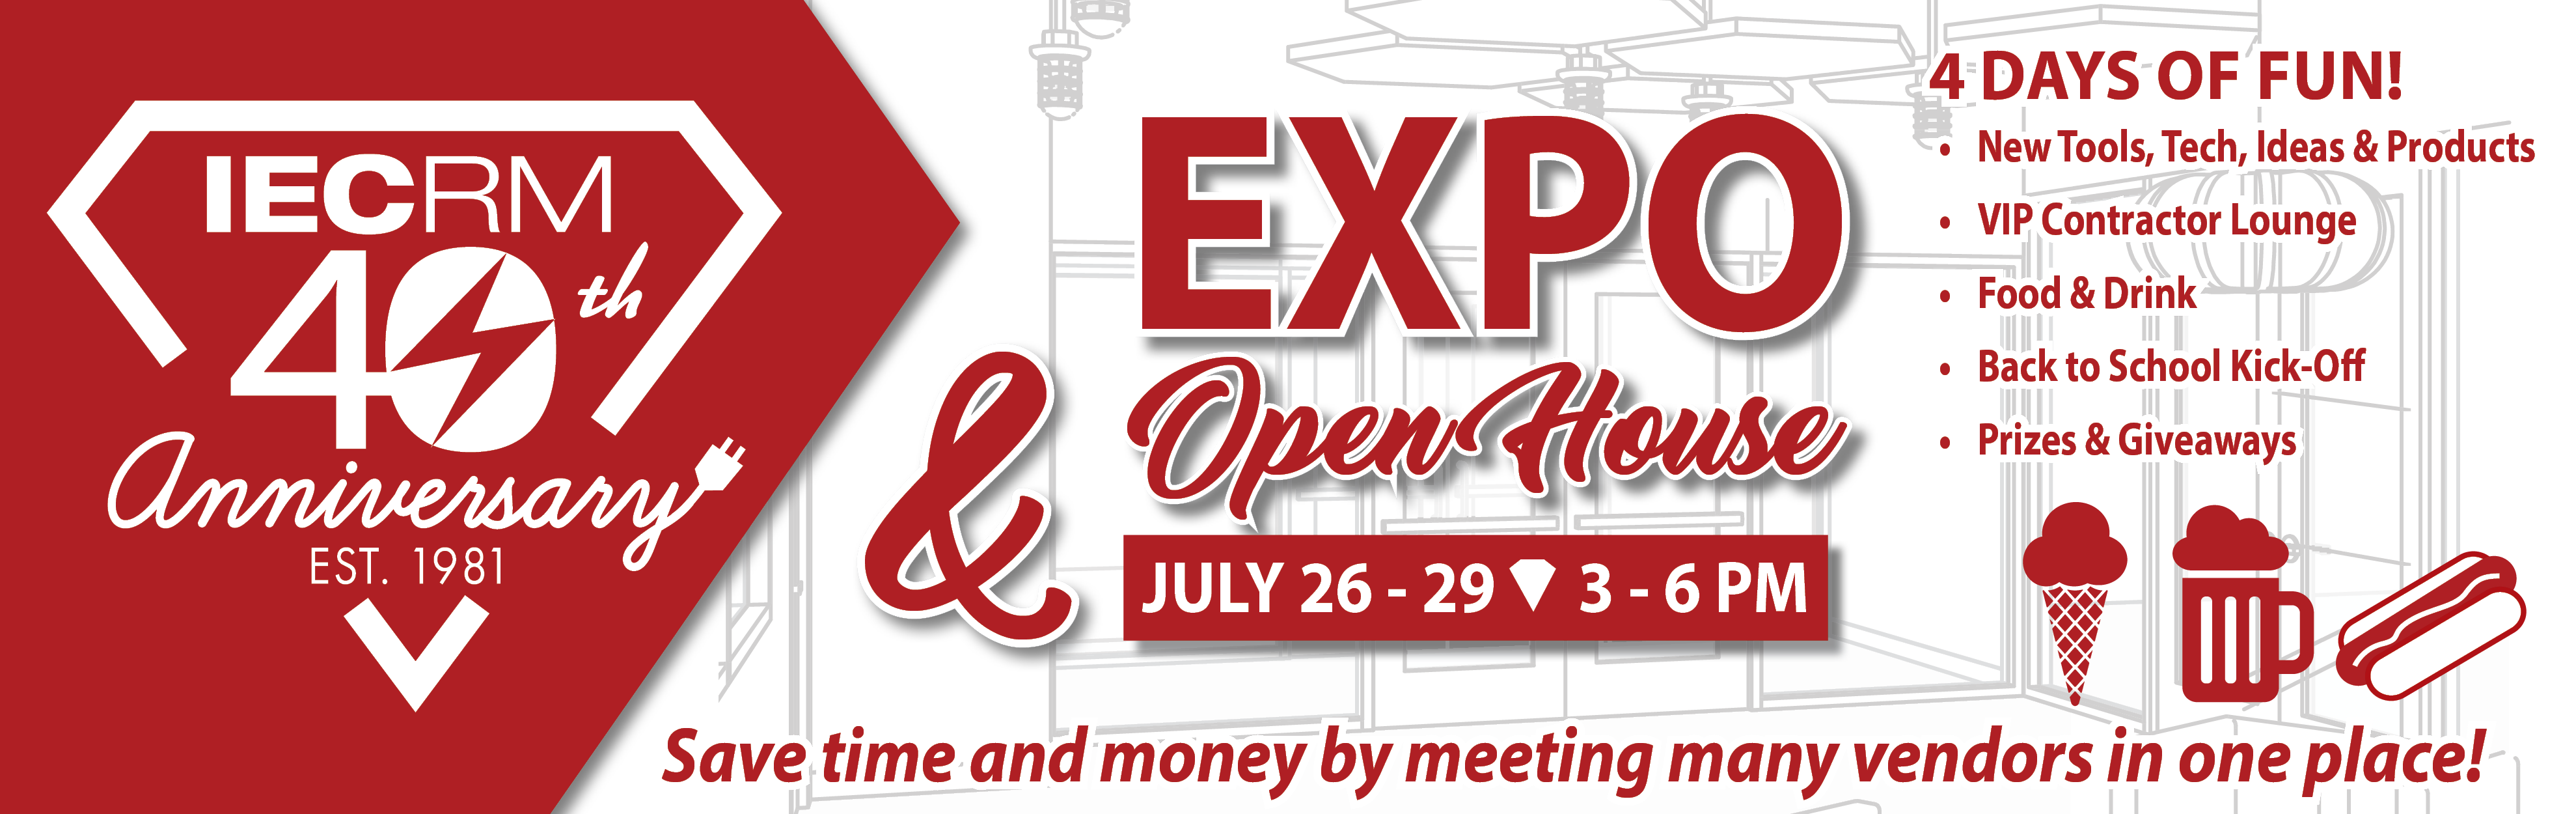 40th Anniversary Party, Expo & Open House BOOTH Registration